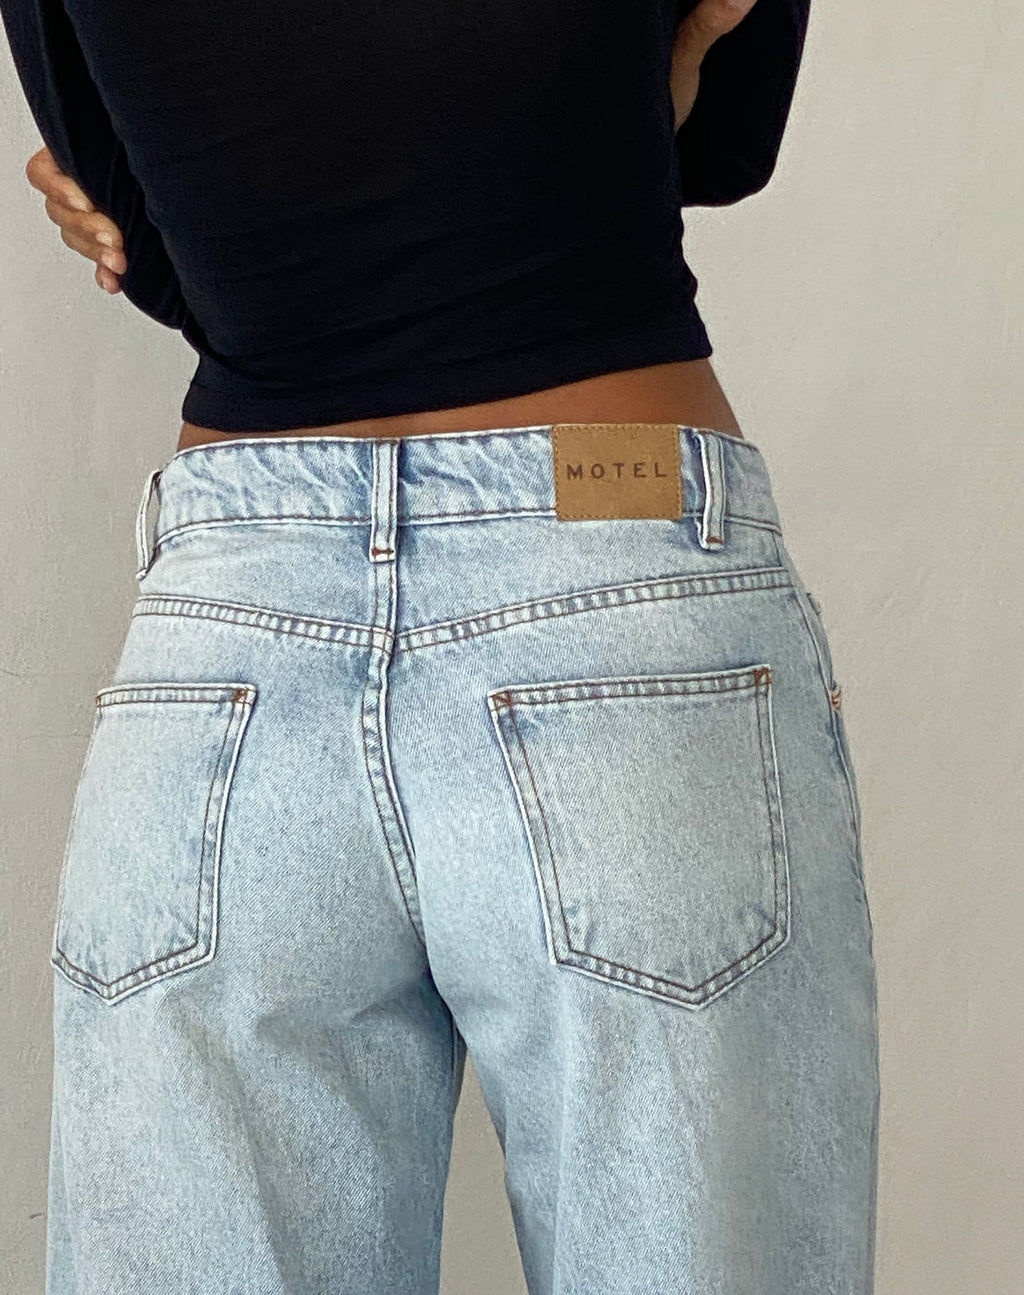 Geräumige extra weite Low Rise Jeans in extrem hellblauer Waschung